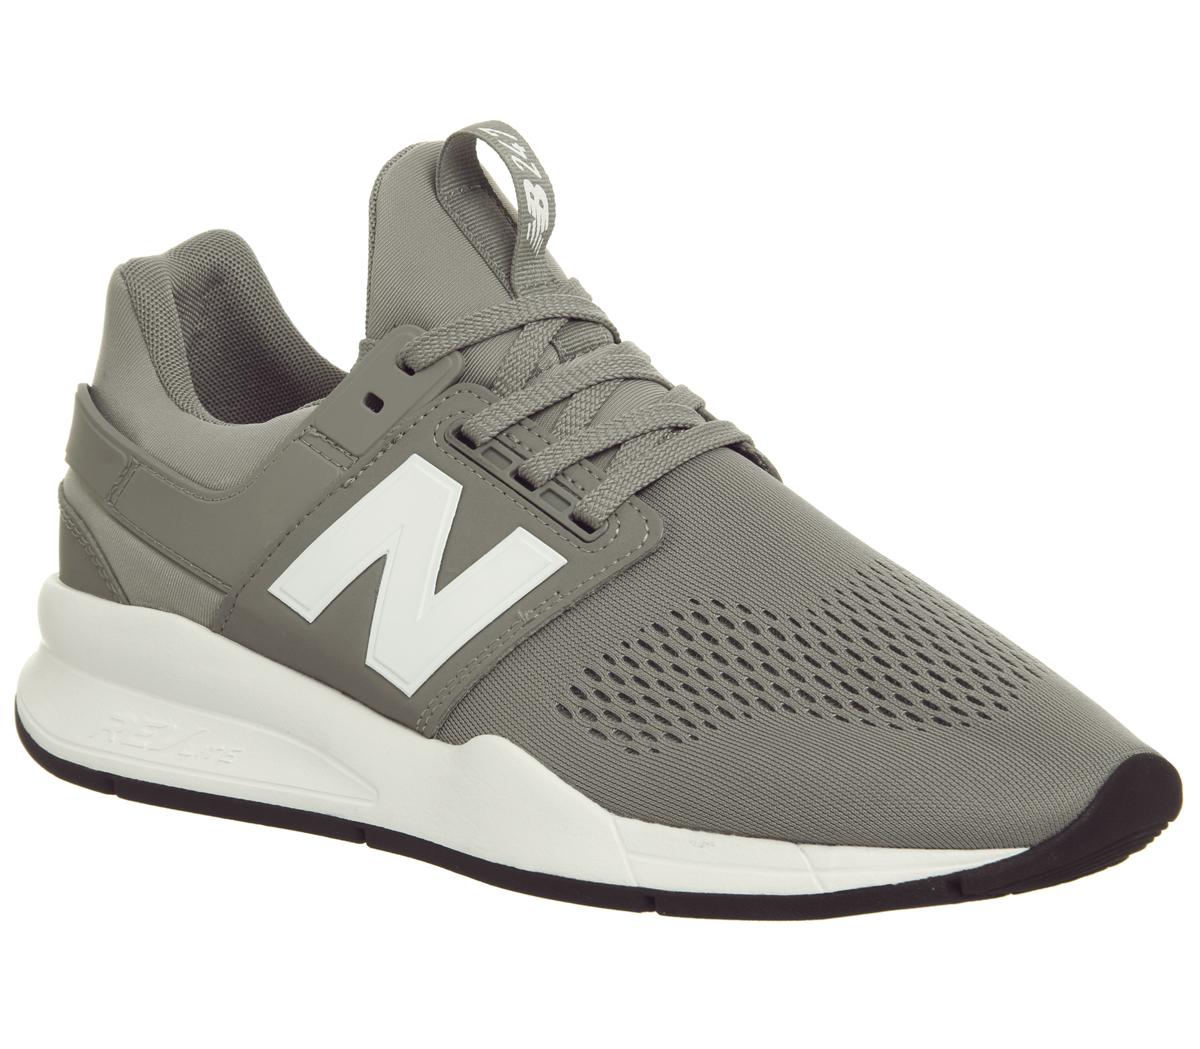 new balance 247v2 trainers, OFF 78%,Buy!